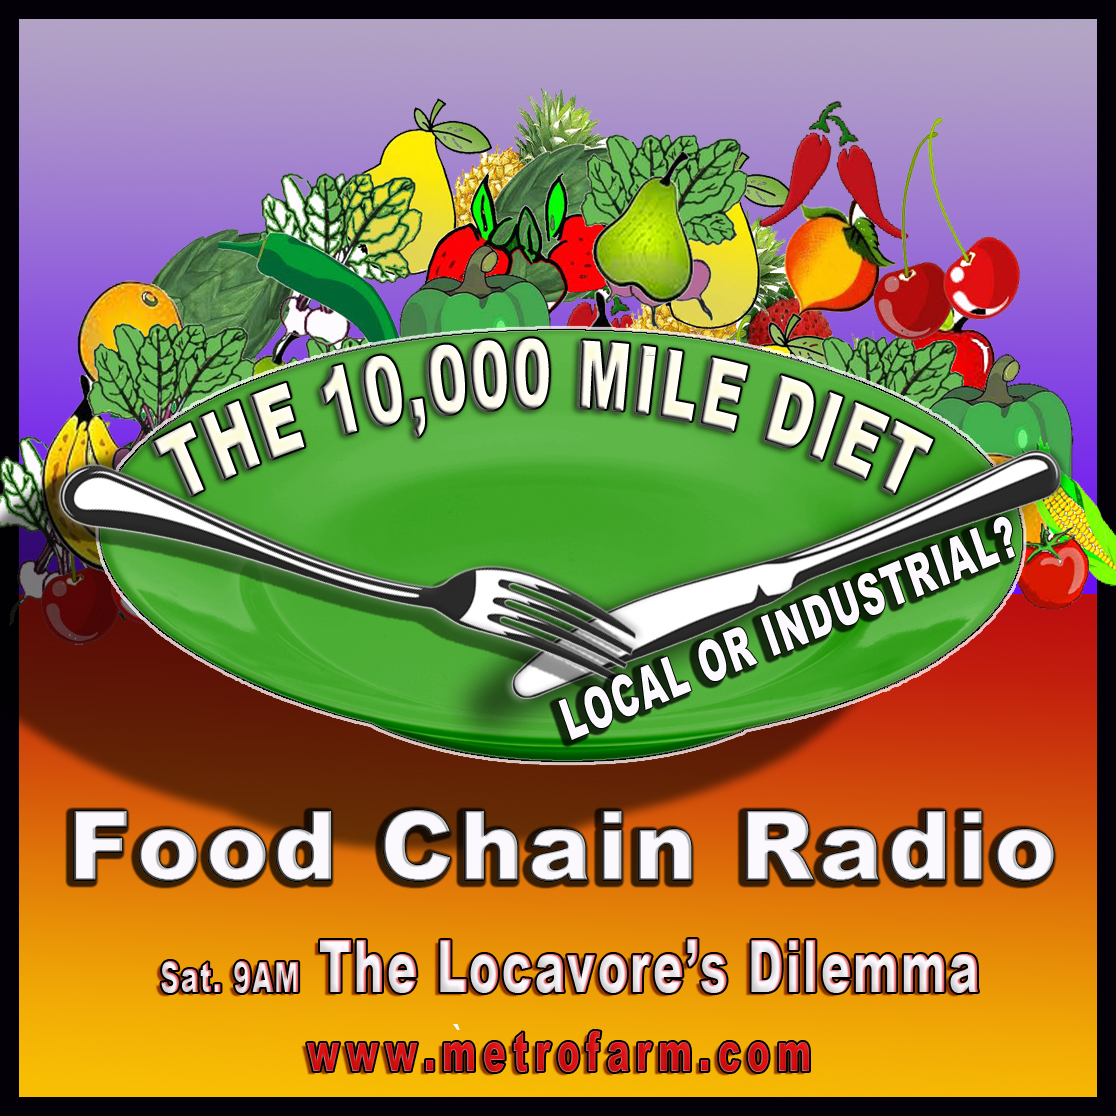 Michael Olson Food Chain Radio: WHICH FOOD IS THE ECONOMICALLY MOST EFFICIENT: LOCAL OR INDUSTRIAL?